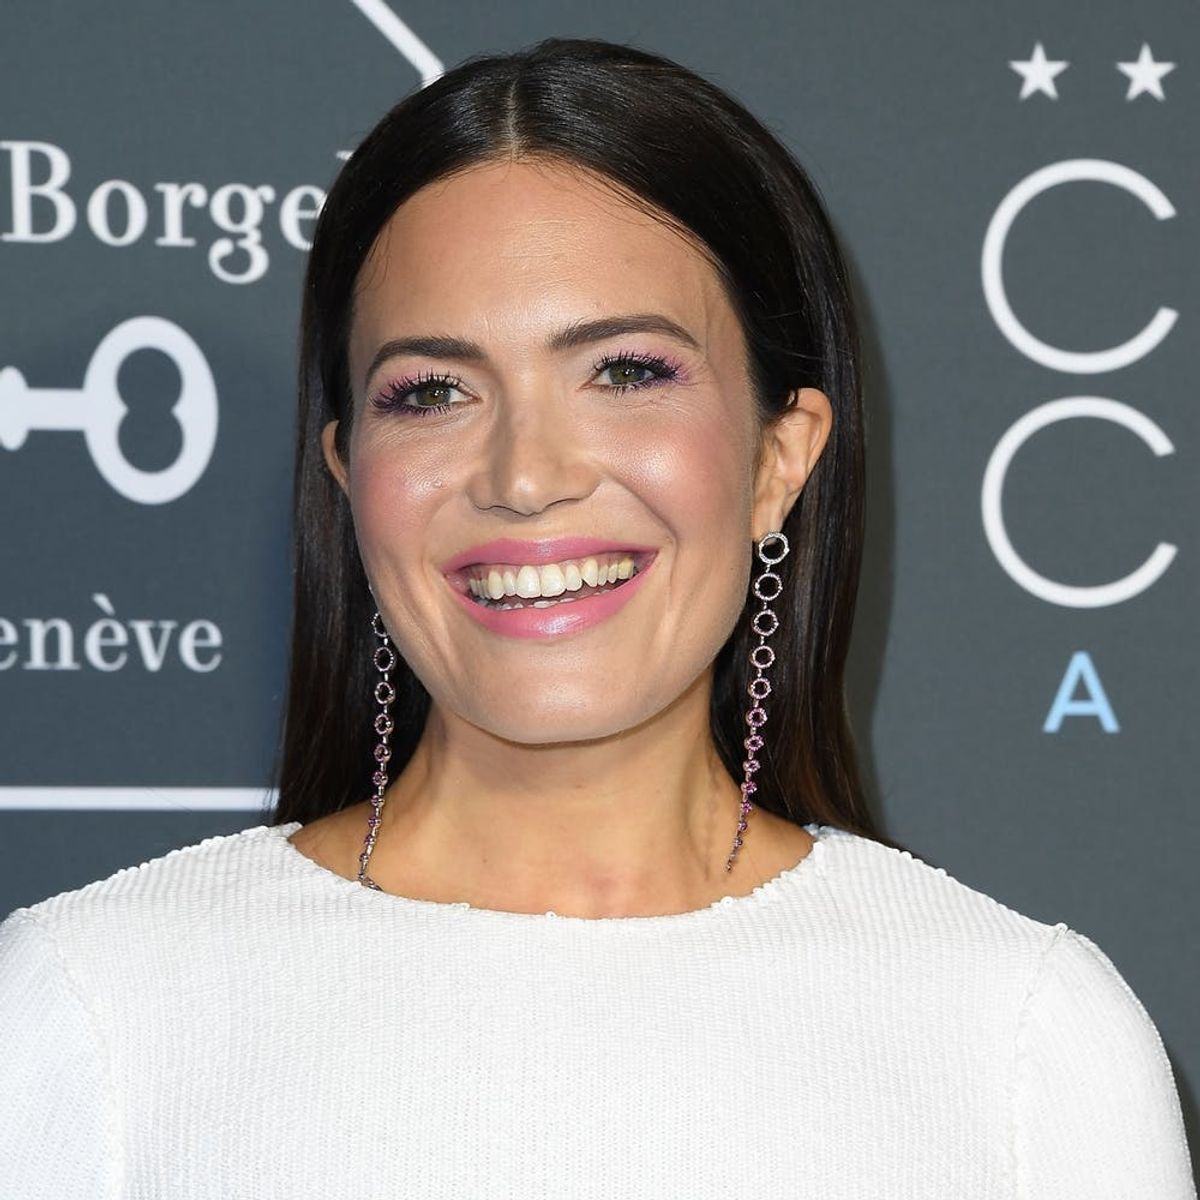 Mandy Moore Ditches Her Long Hair for a Chin-Grazing Bob